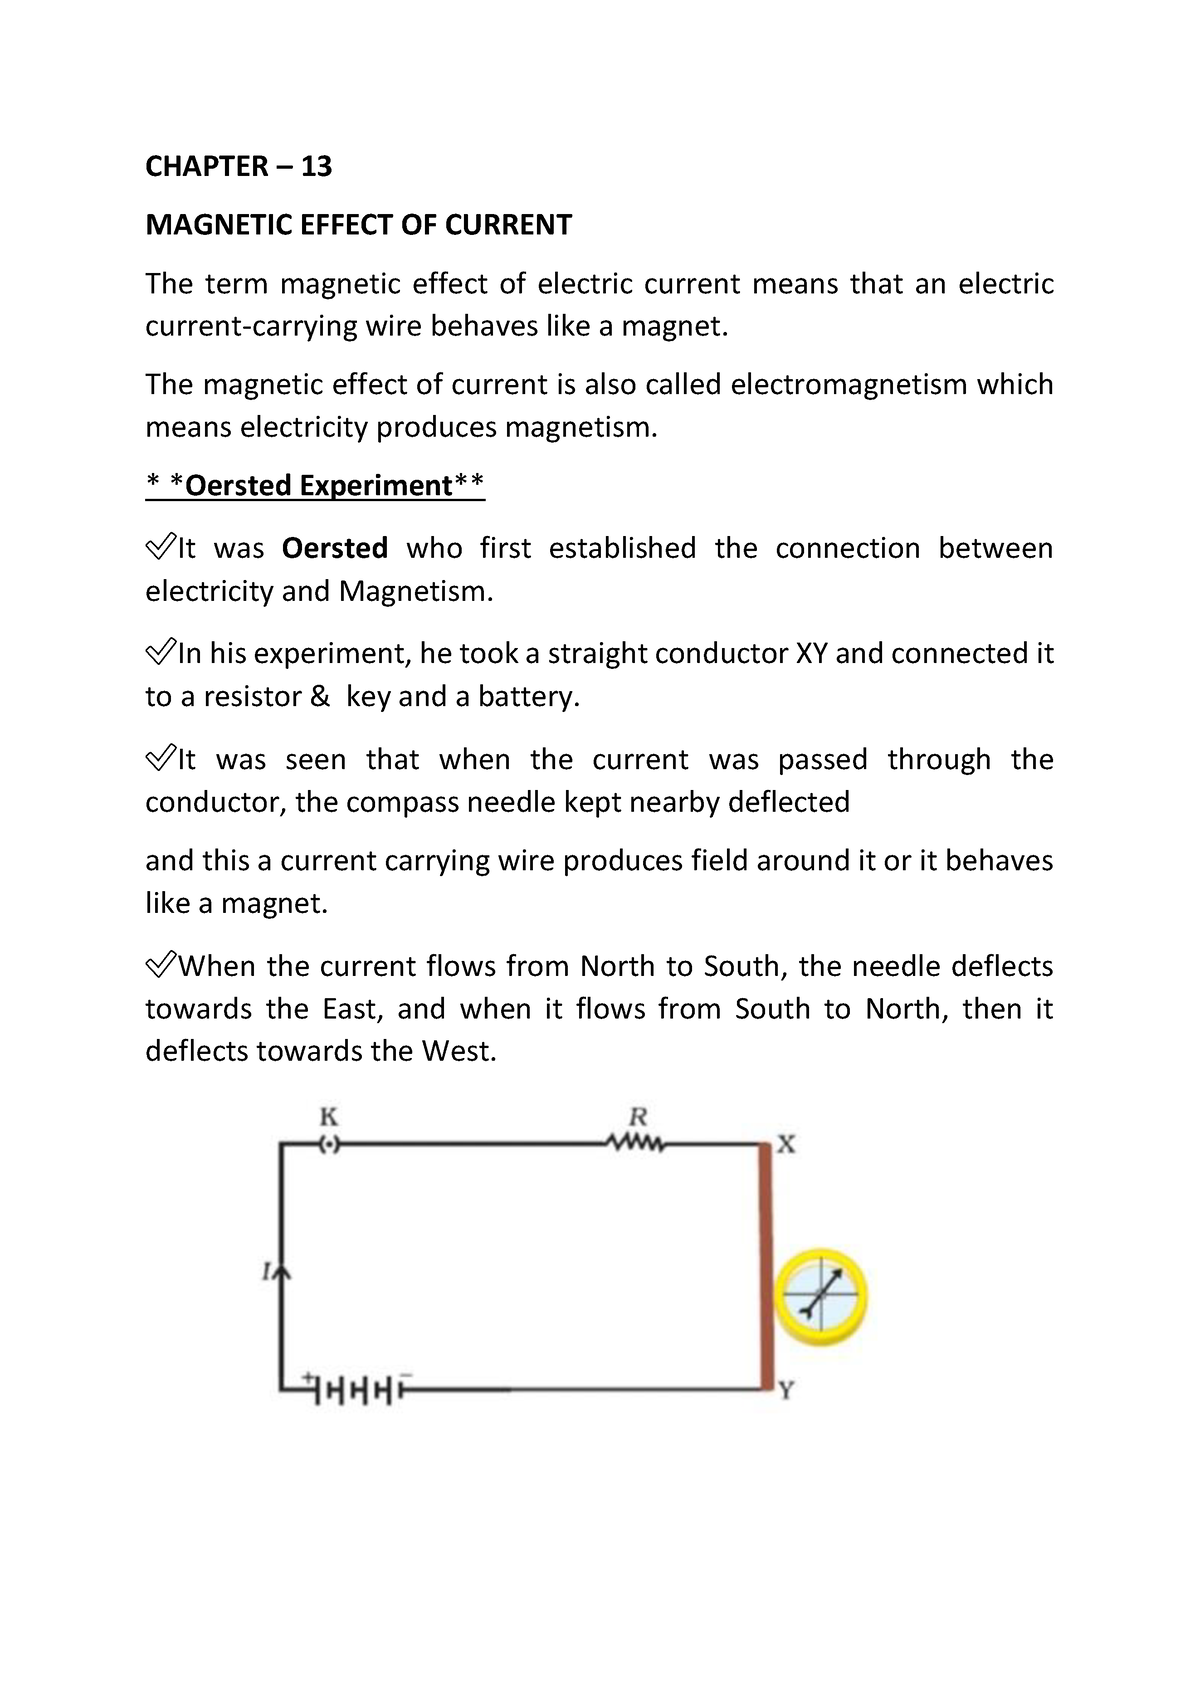 Magnetic effects of electric current. pdf - CHAPTER – 13 MAGNETIC